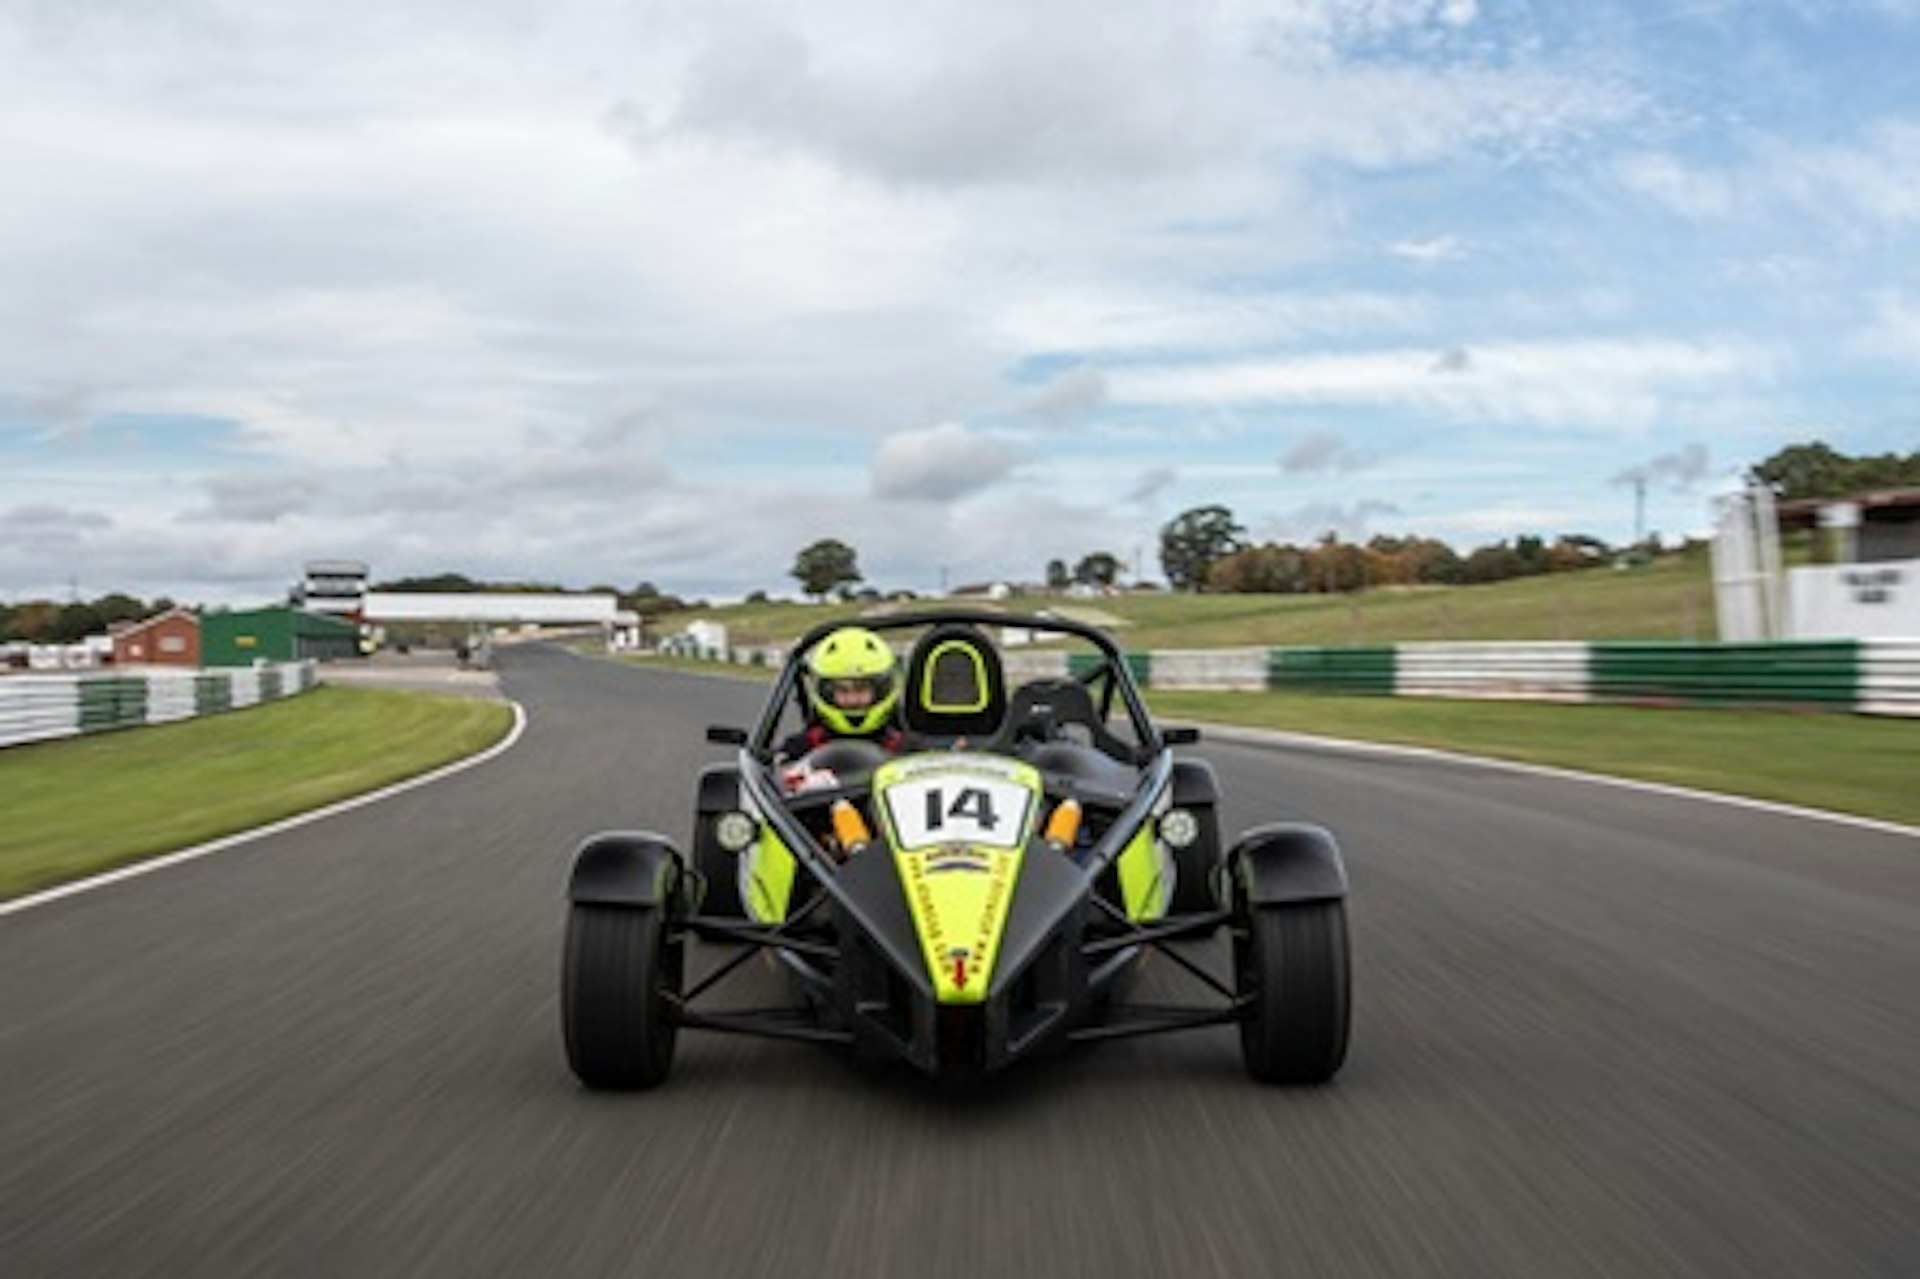 Ultimate Double Ariel Atom Experience with Hot Lap - Anytime 1